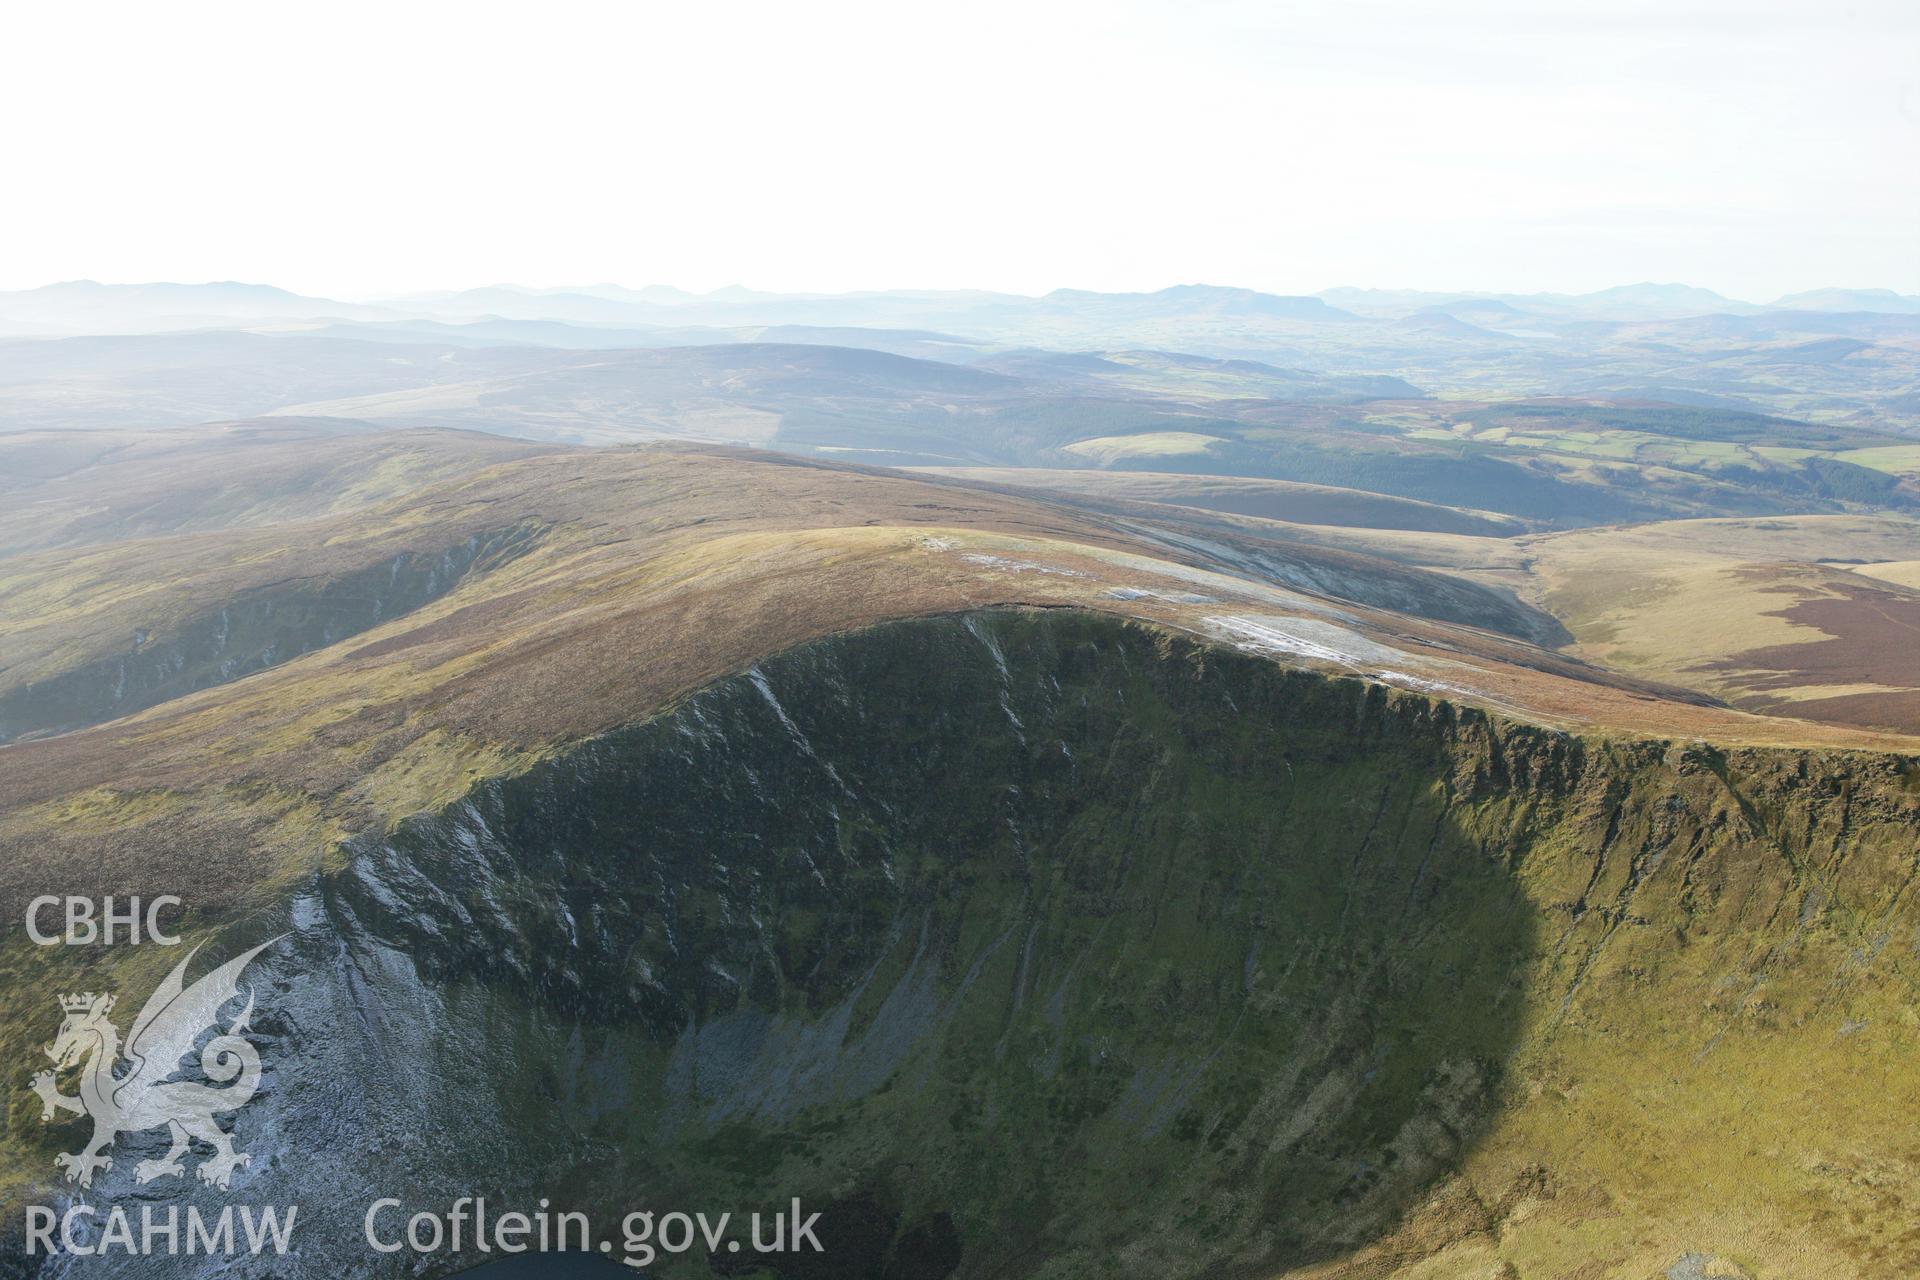 RCAHMW colour oblique photograph of Moel Sych summit and cairn. Taken by Toby Driver on 08/02/2011.